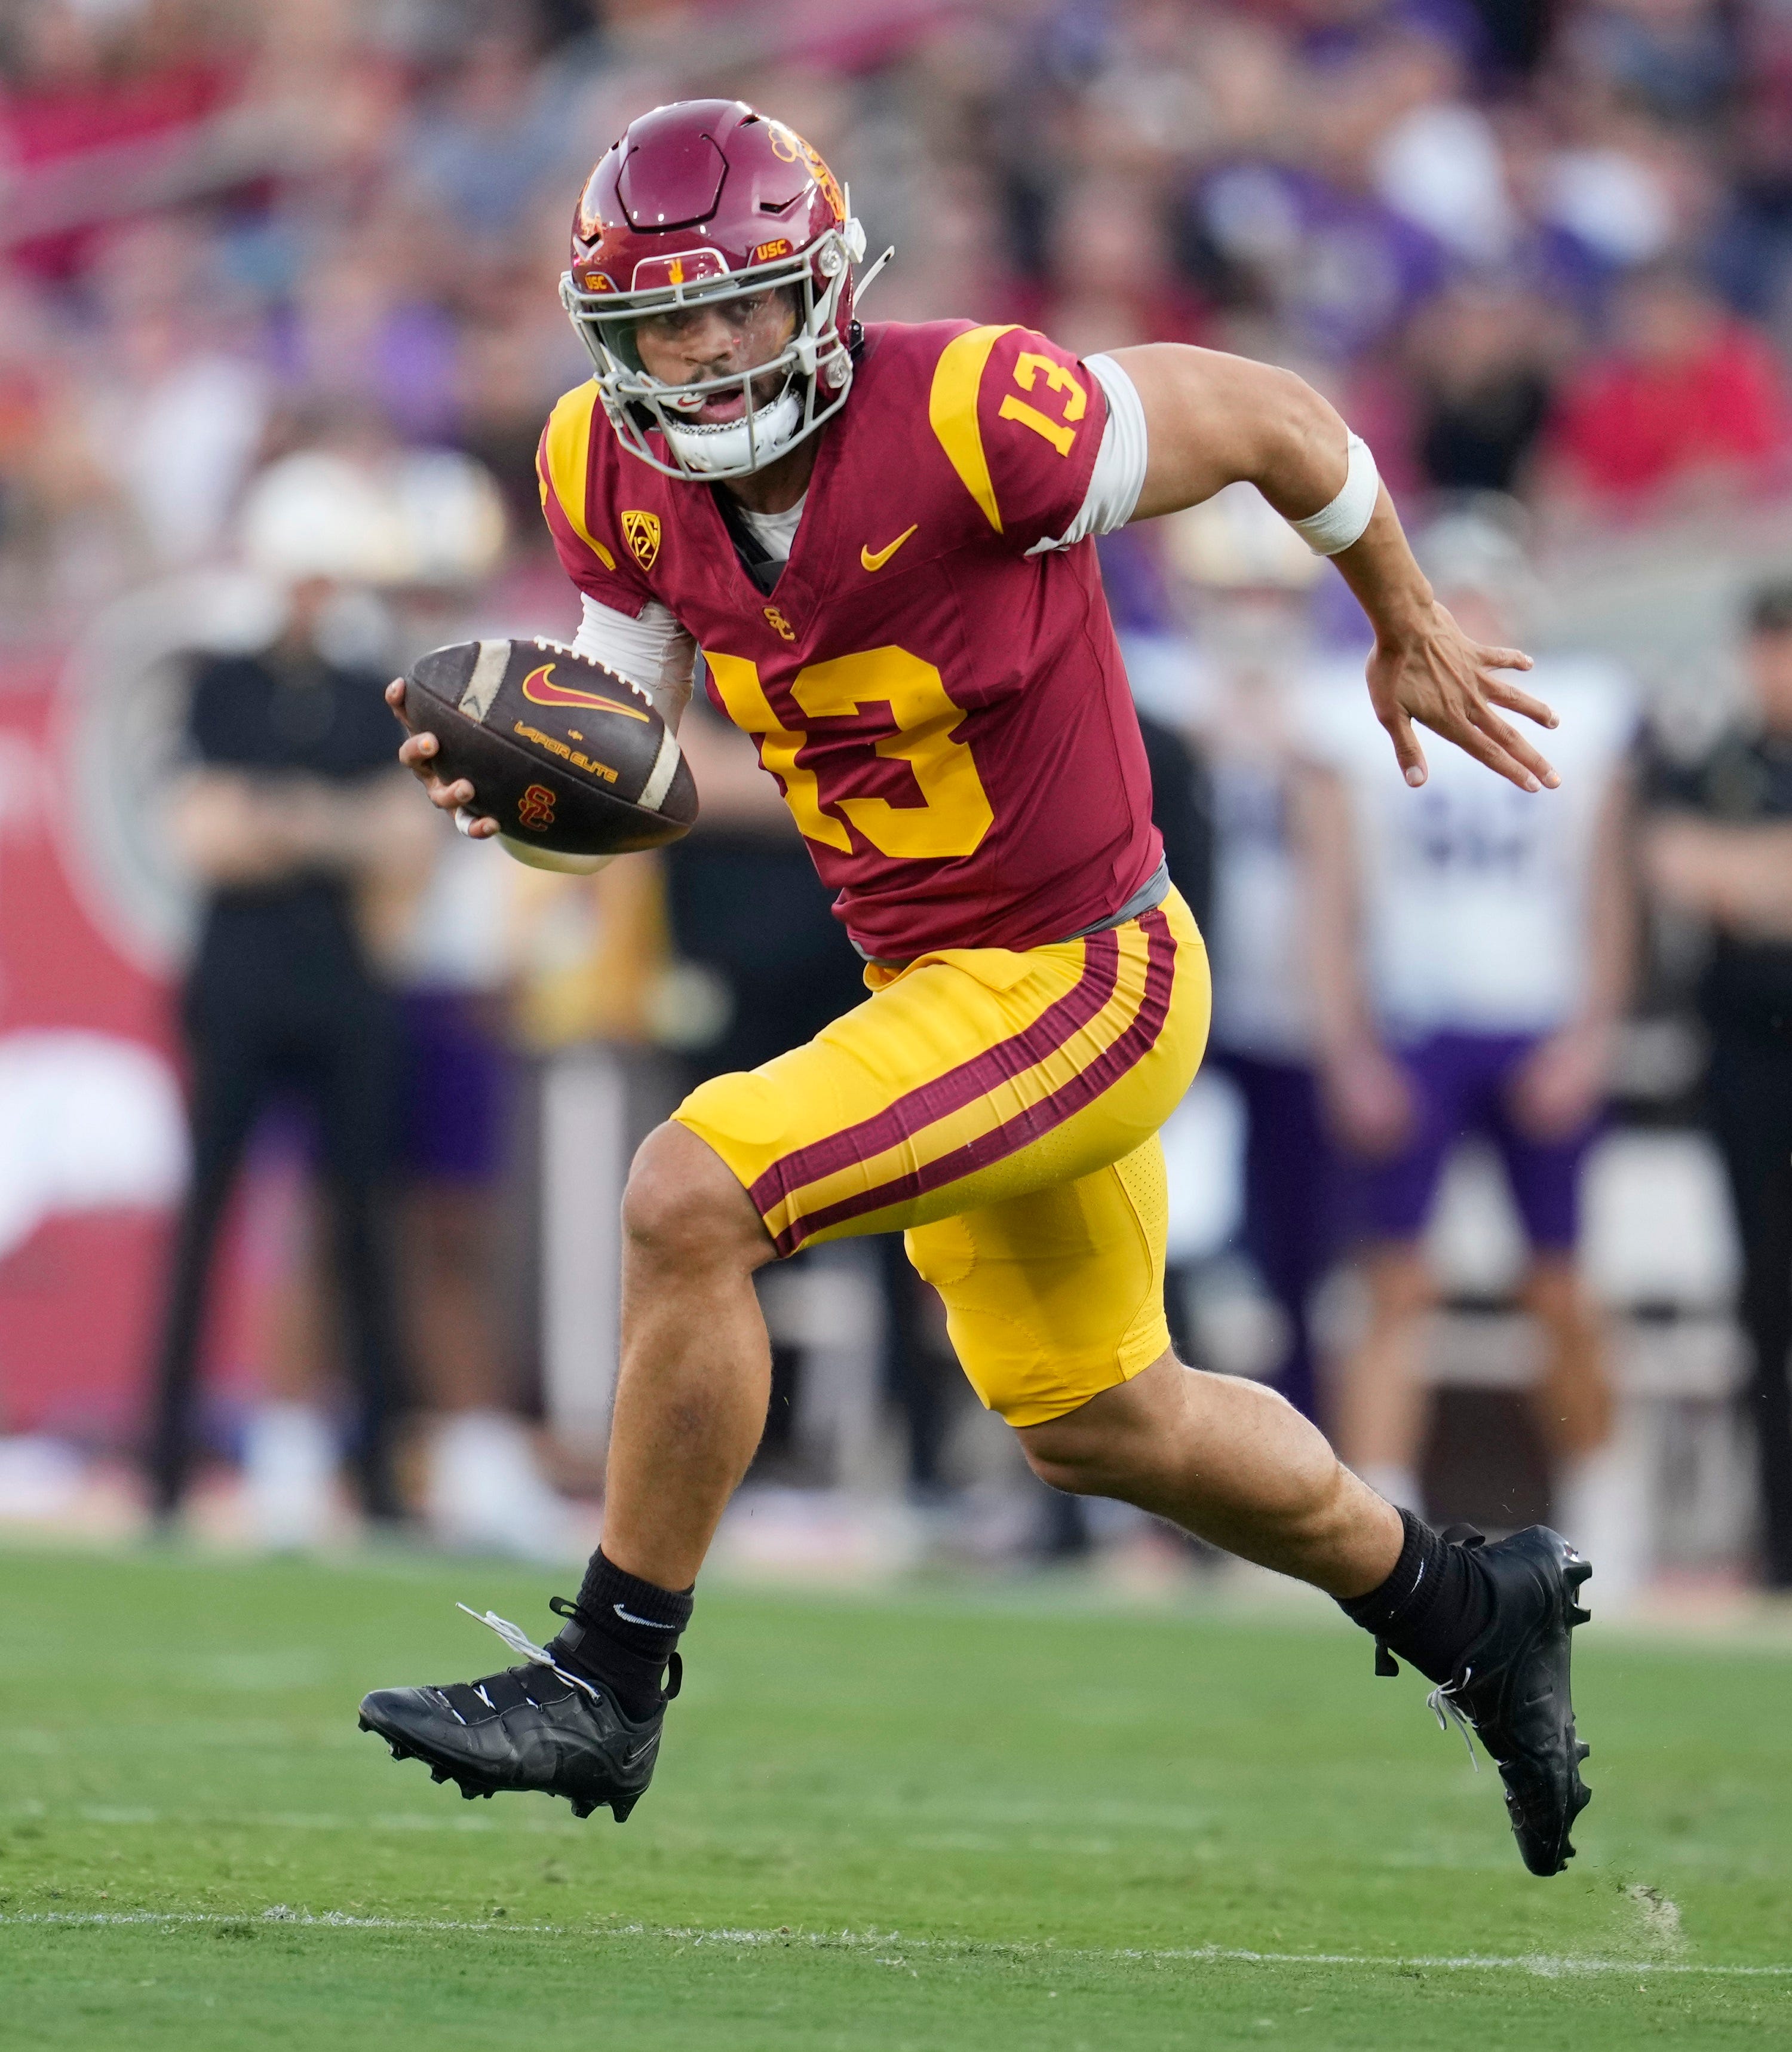 USC quarterback Caleb Williams will be among the prospects attending this week's NFL Draft in Detroit.